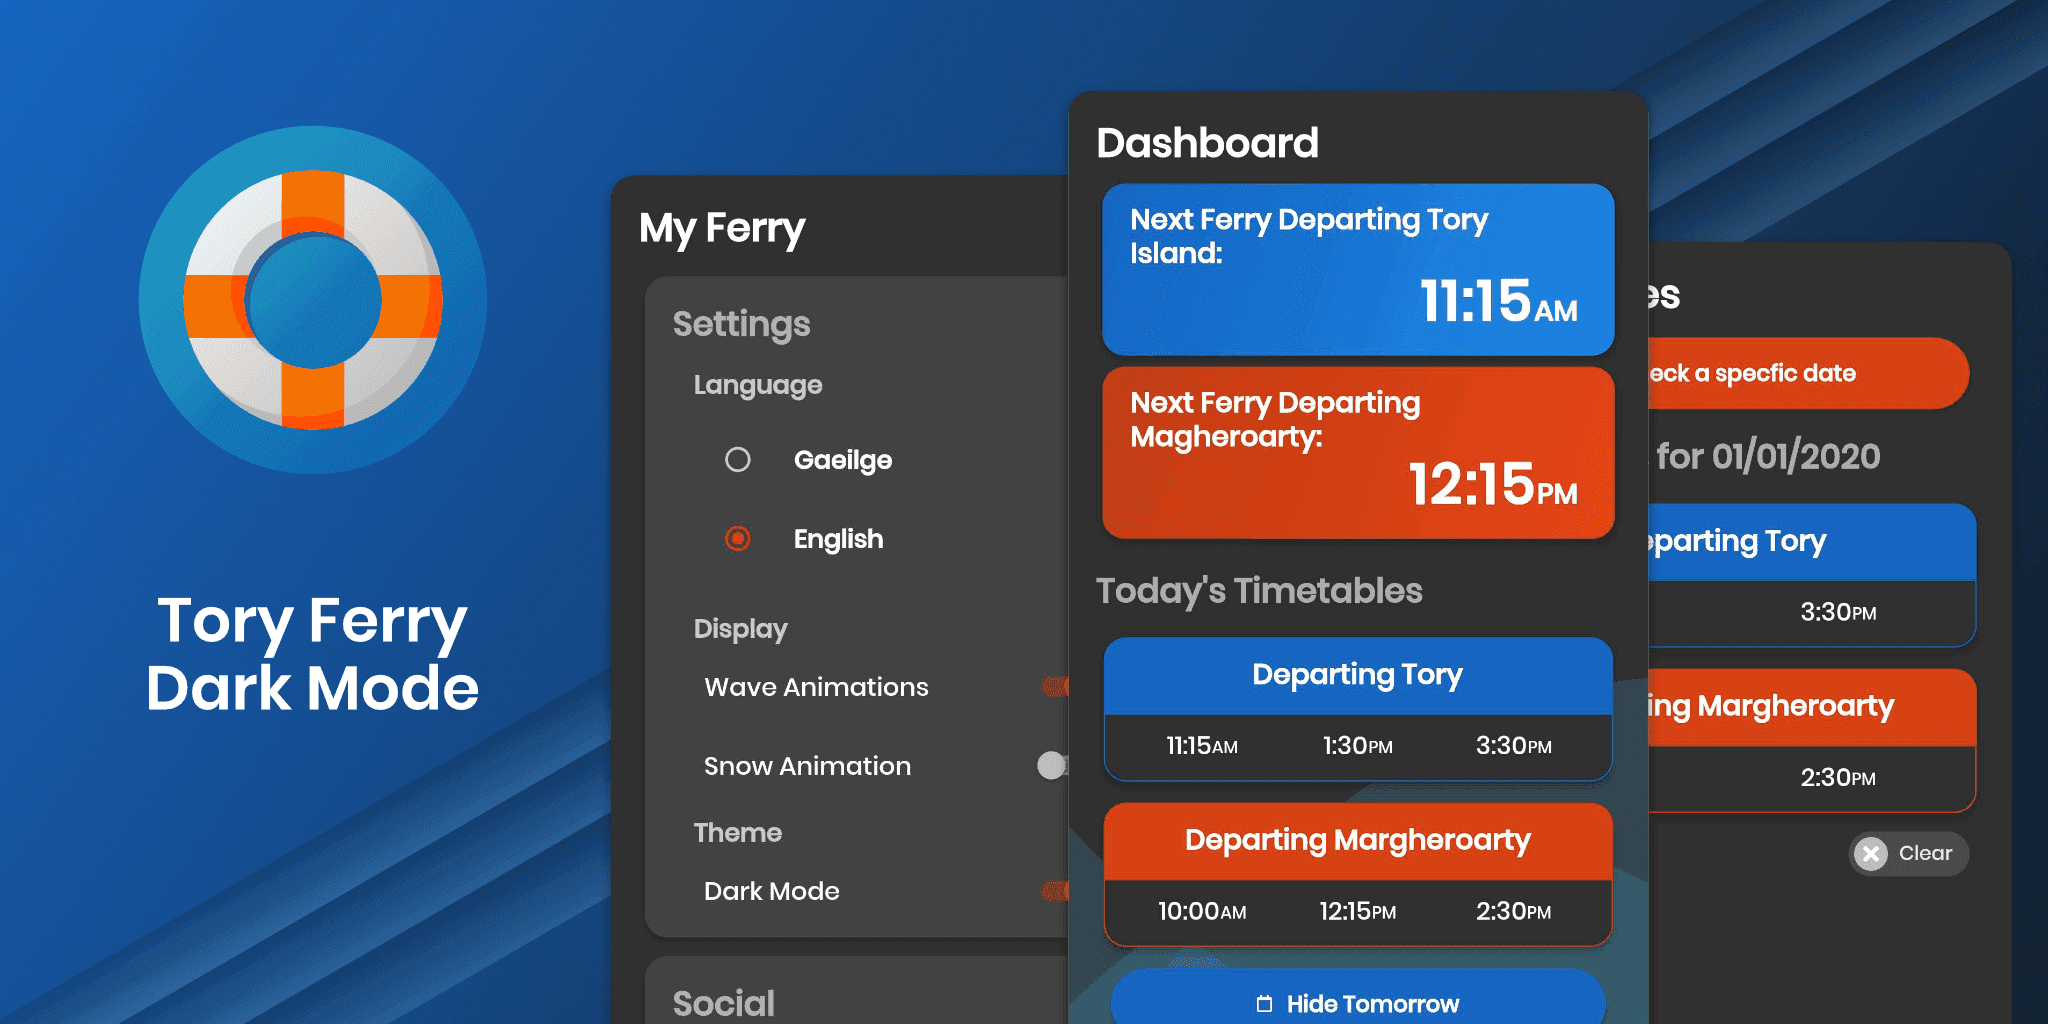 Dark Mode Arrives on the Arranmore and Tory Ferry Apps